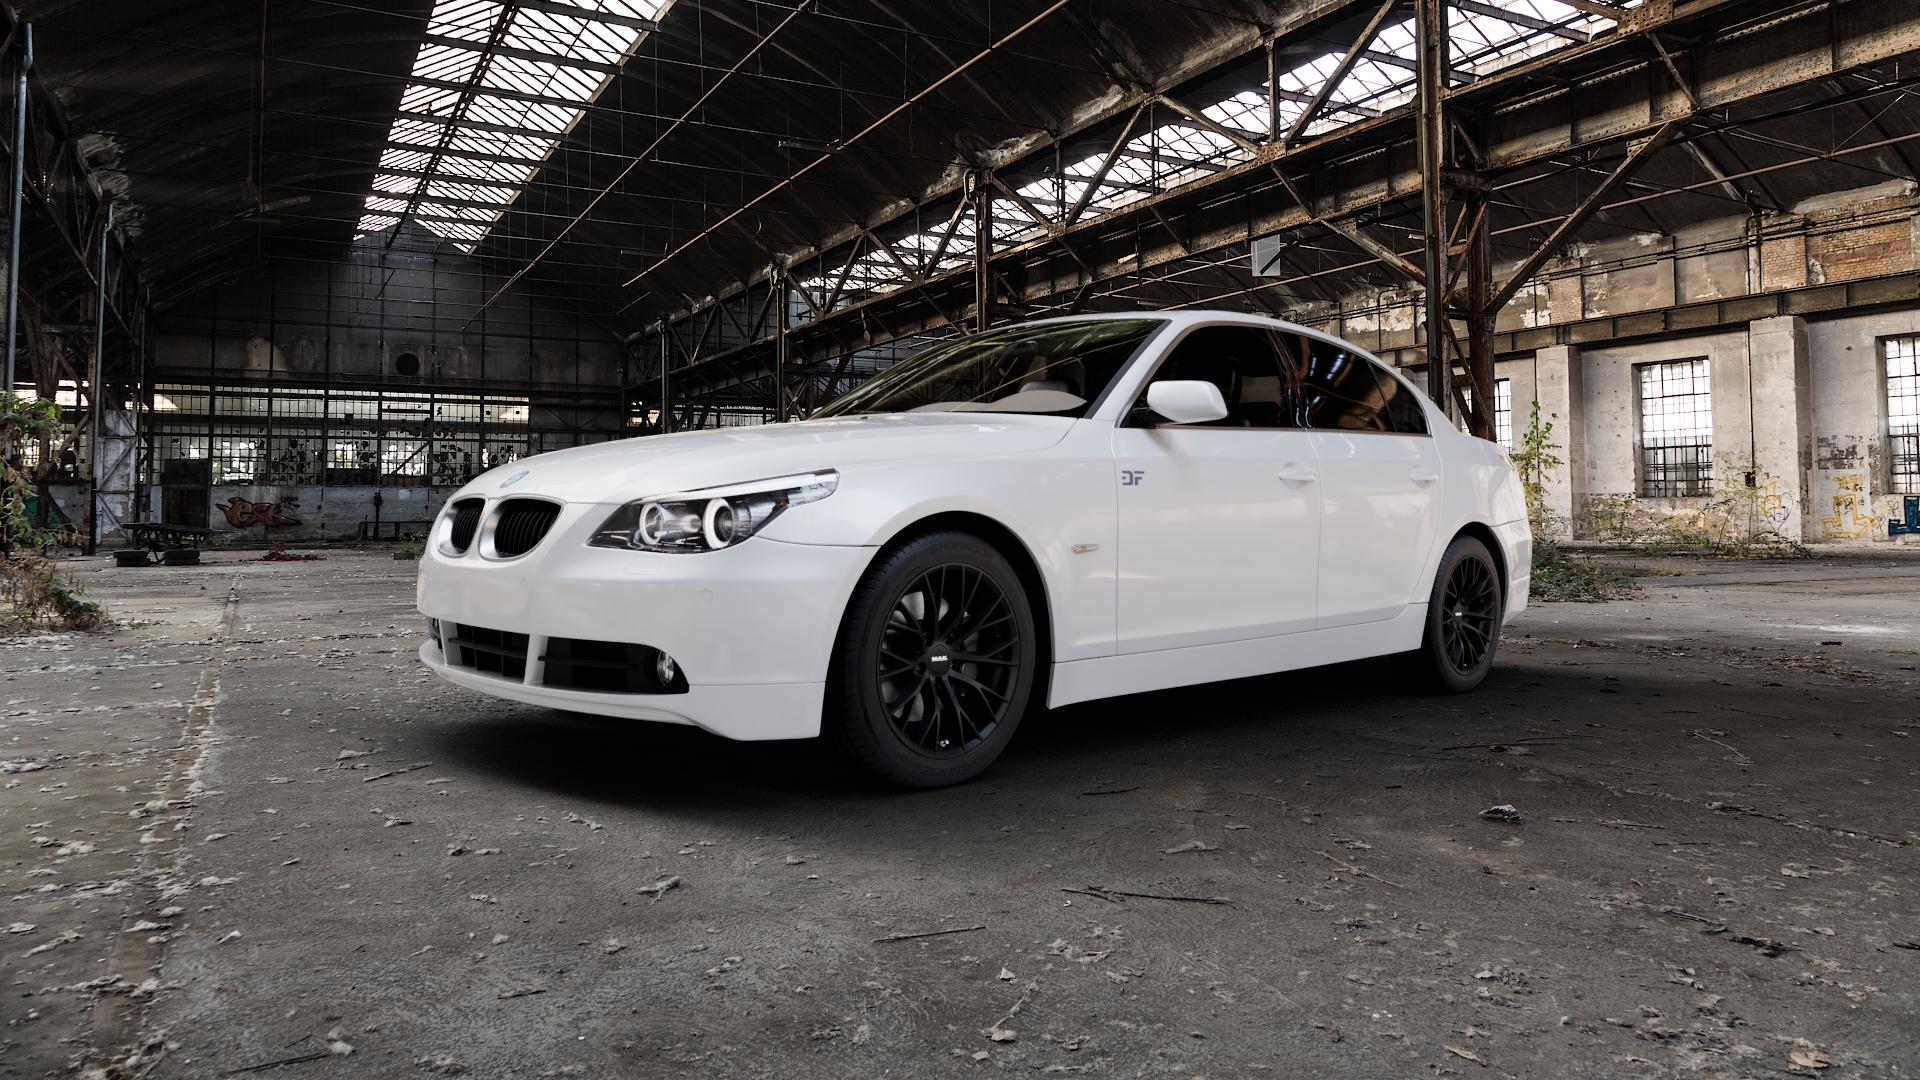 BMW 525d Type E60 (Limousine) 3,0l 145kW (197 hp) Wheels and Tyre Packages  | velonity.com